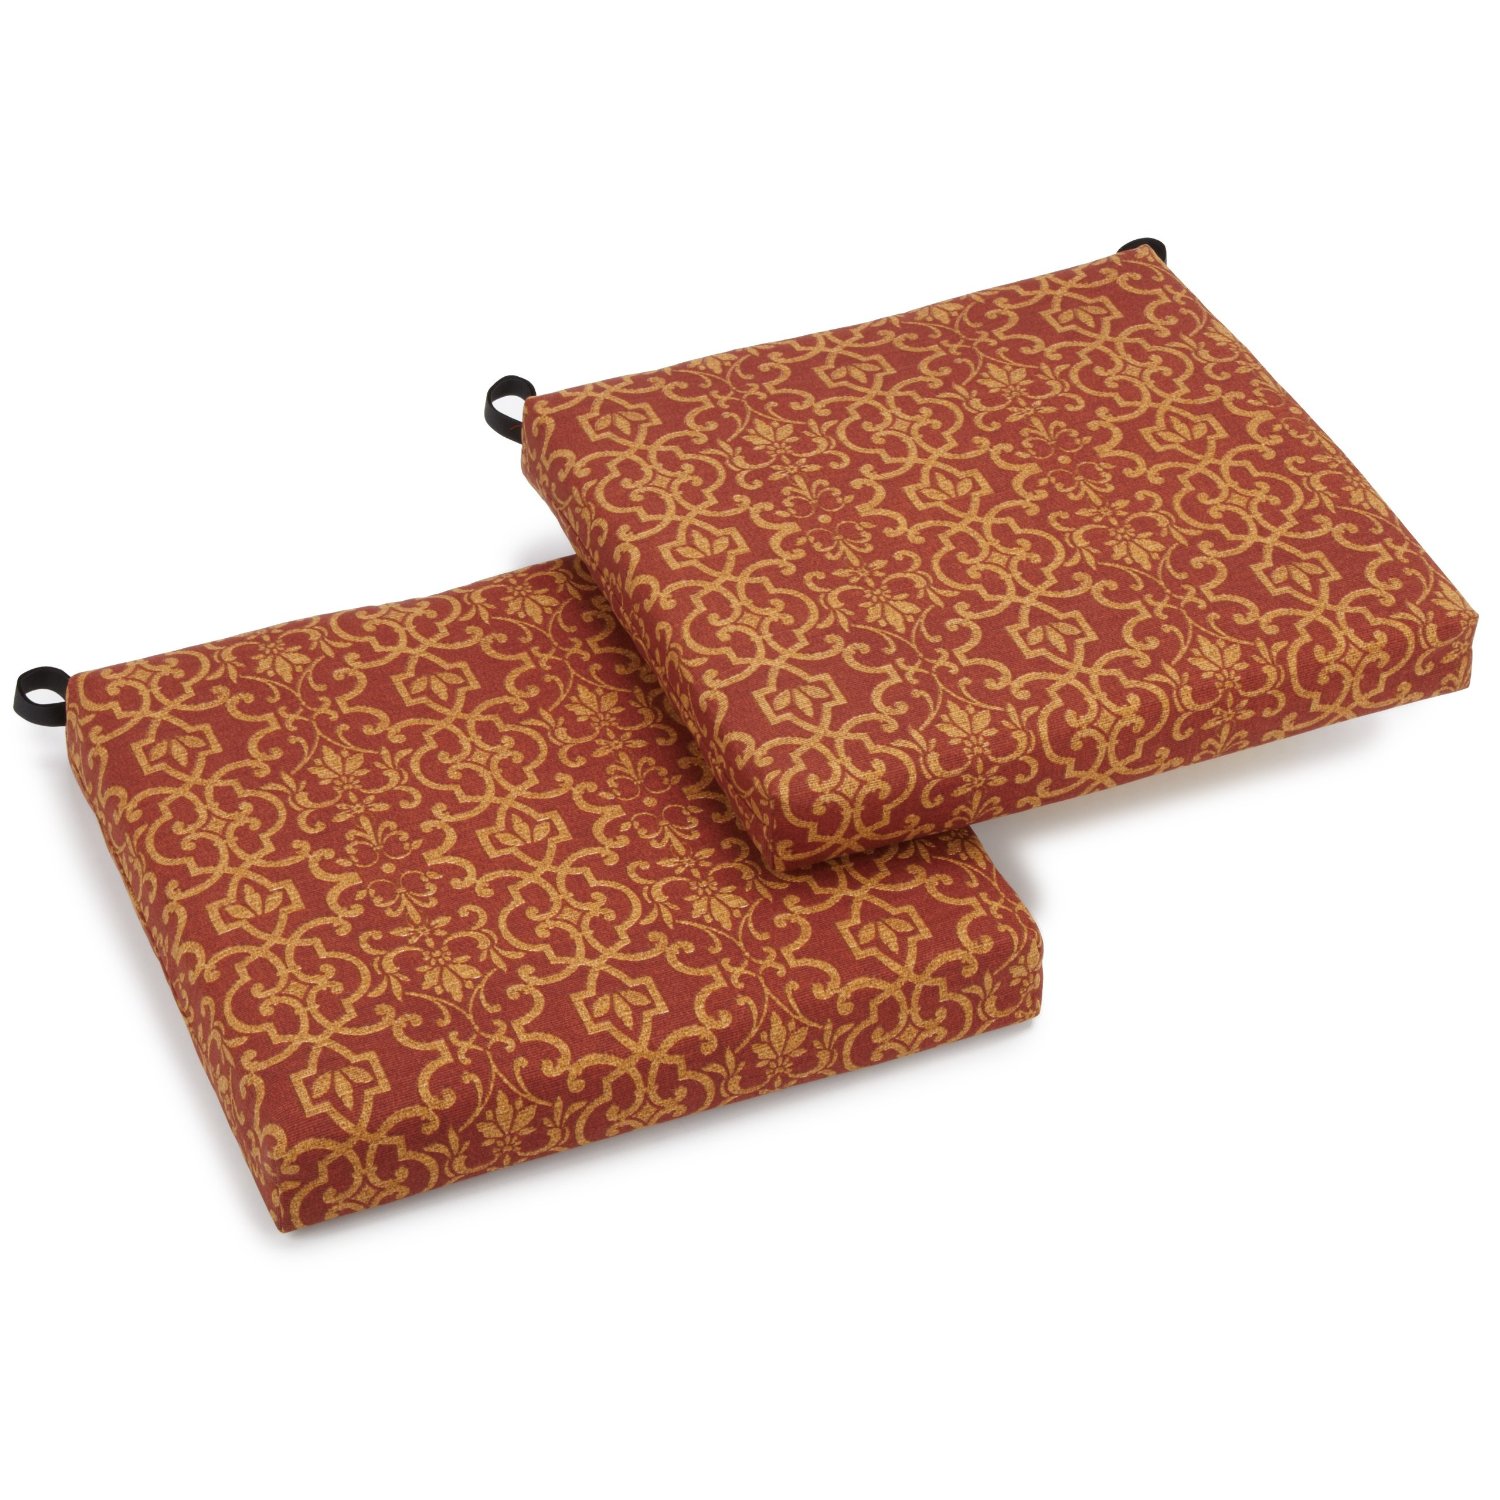 Blazing Needles 20-inch by 19-inch Spun Polyester Chair Cushion (Set of Two) - Vanya Paprika